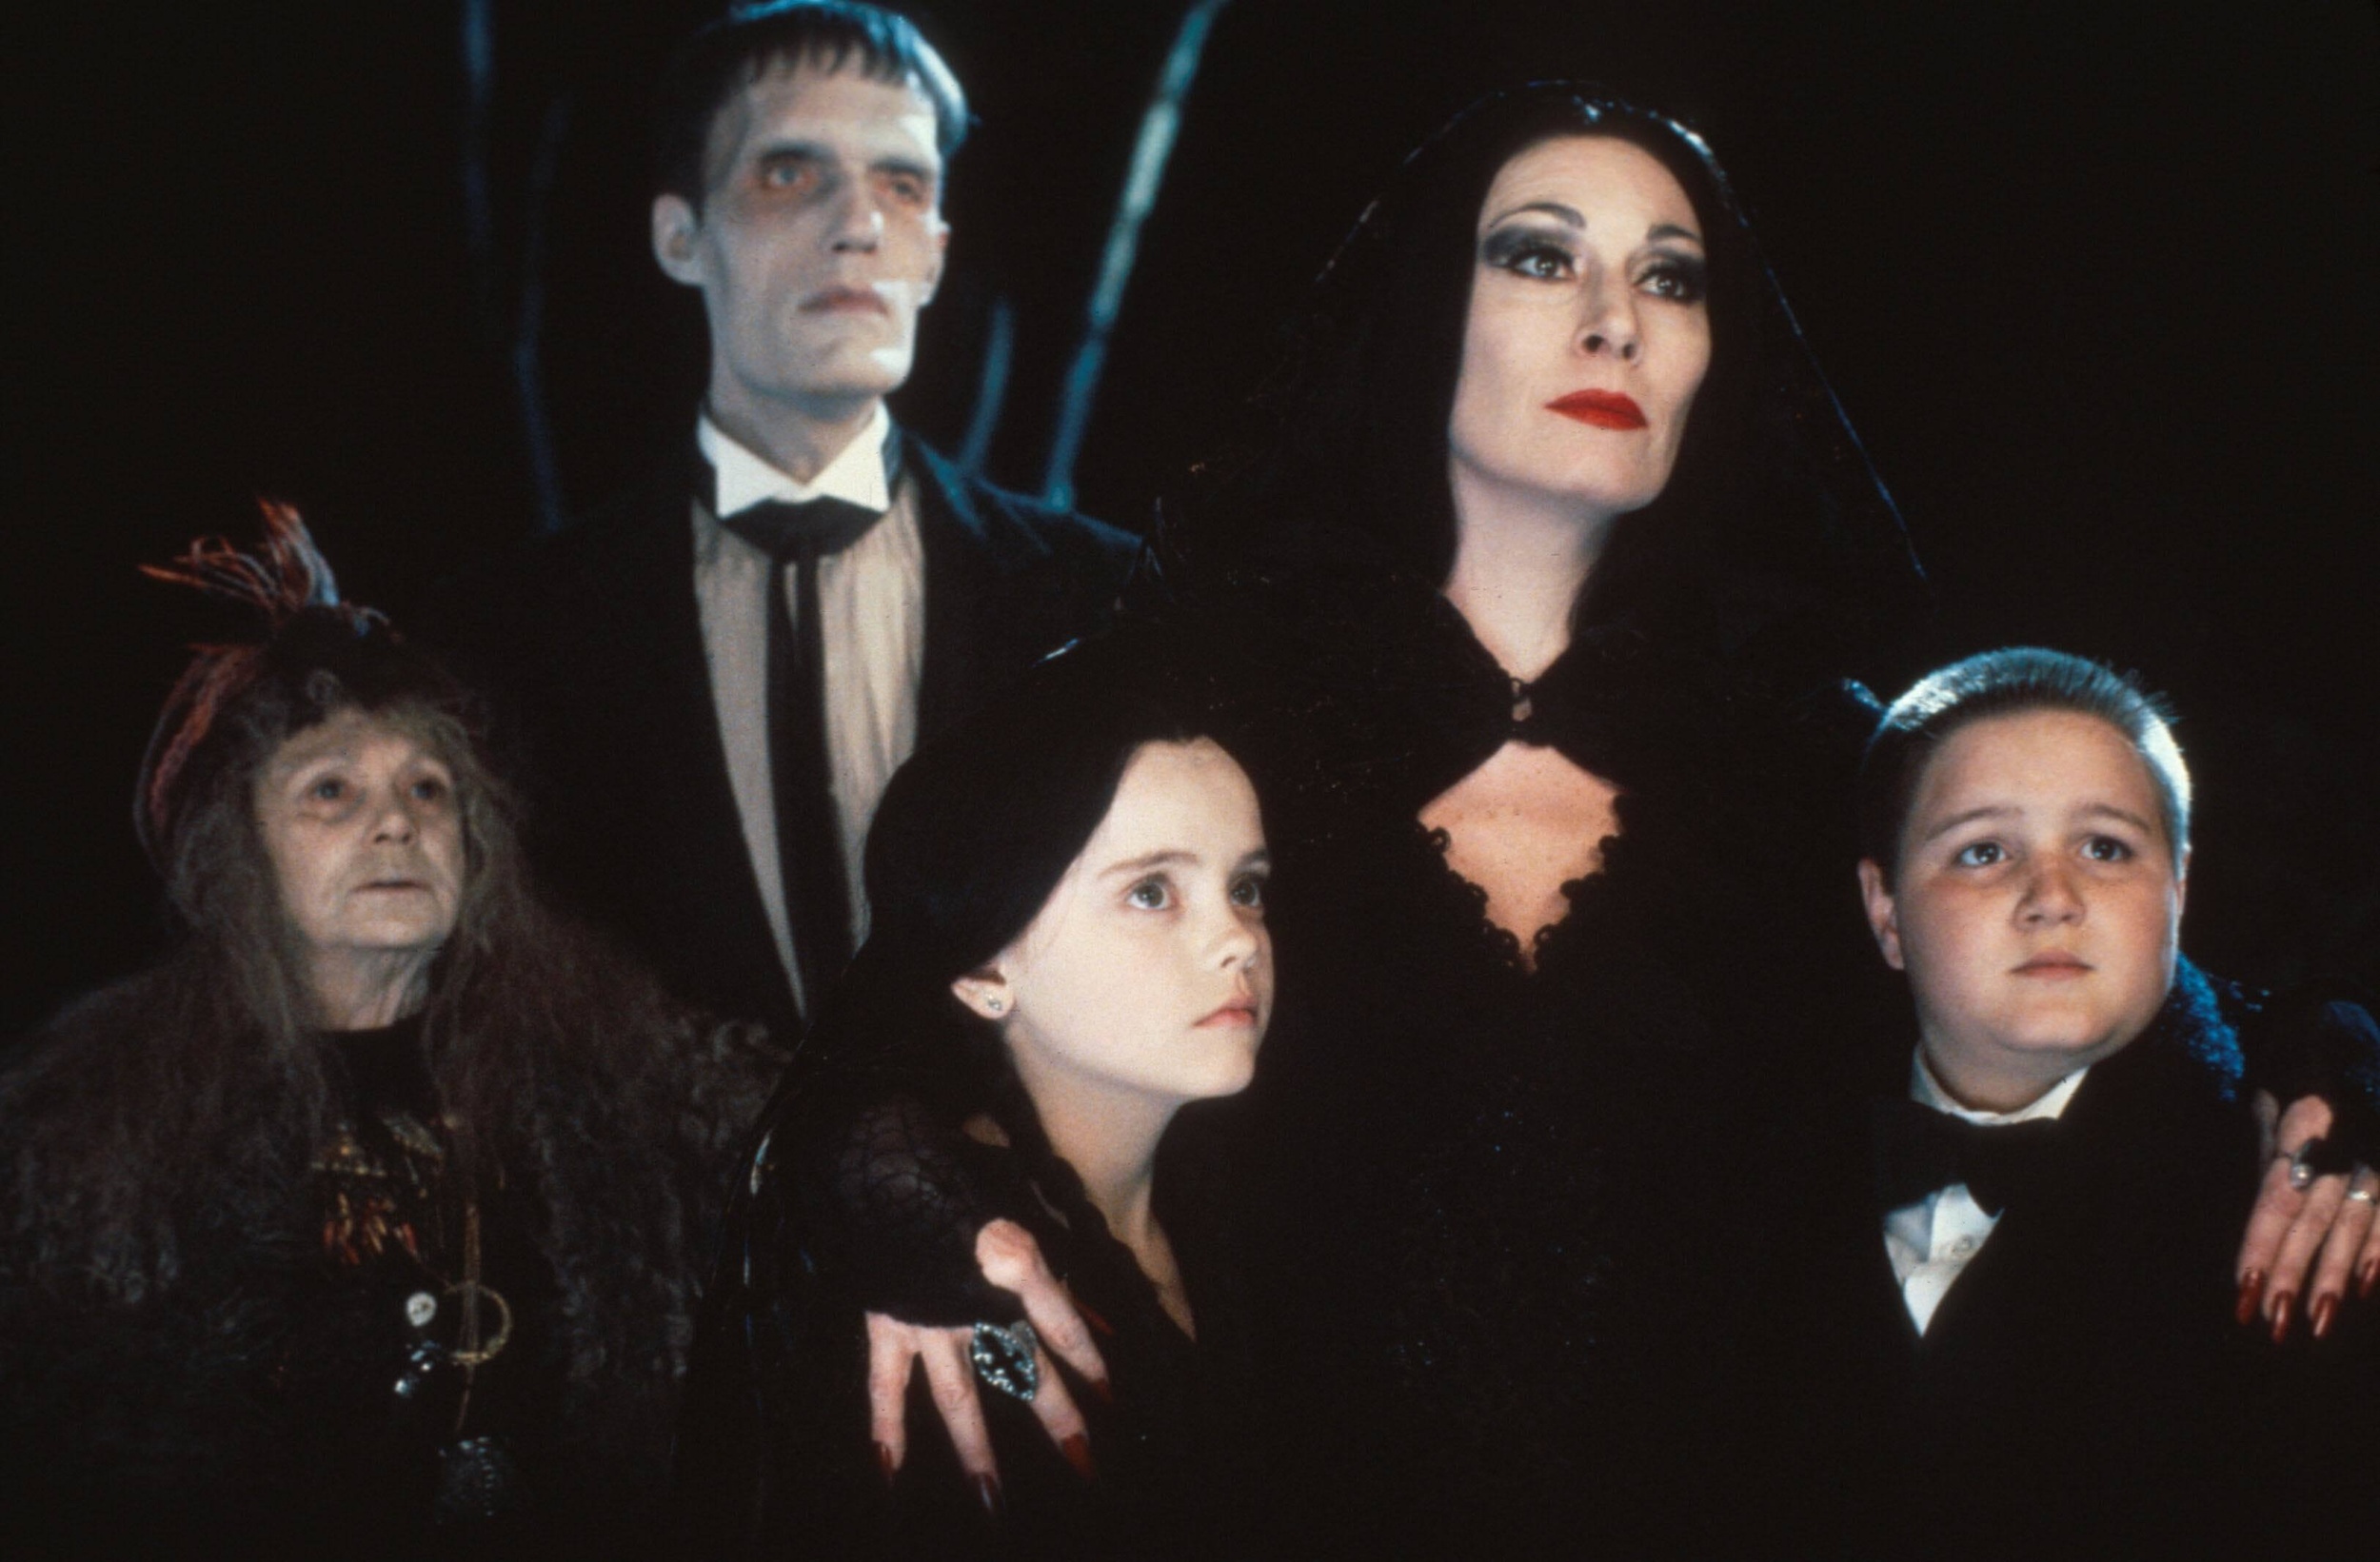 <p>It turned out that Orion didn’t have anything to fear. Yes, the production was a mess and went over budget, but <em>The Addams Family</em> turned out to be a big success. The movie ended up making $191.5 million against a $30 million budget, with $113.5 million of that coming in the United States, where Paramount had the rights.</p><p><a href='https://www.msn.com/en-us/community/channel/vid-cj9pqbr0vn9in2b6ddcd8sfgpfq6x6utp44fssrv6mc2gtybw0us'>Follow us on MSN to see more of our exclusive entertainment content.</a></p>